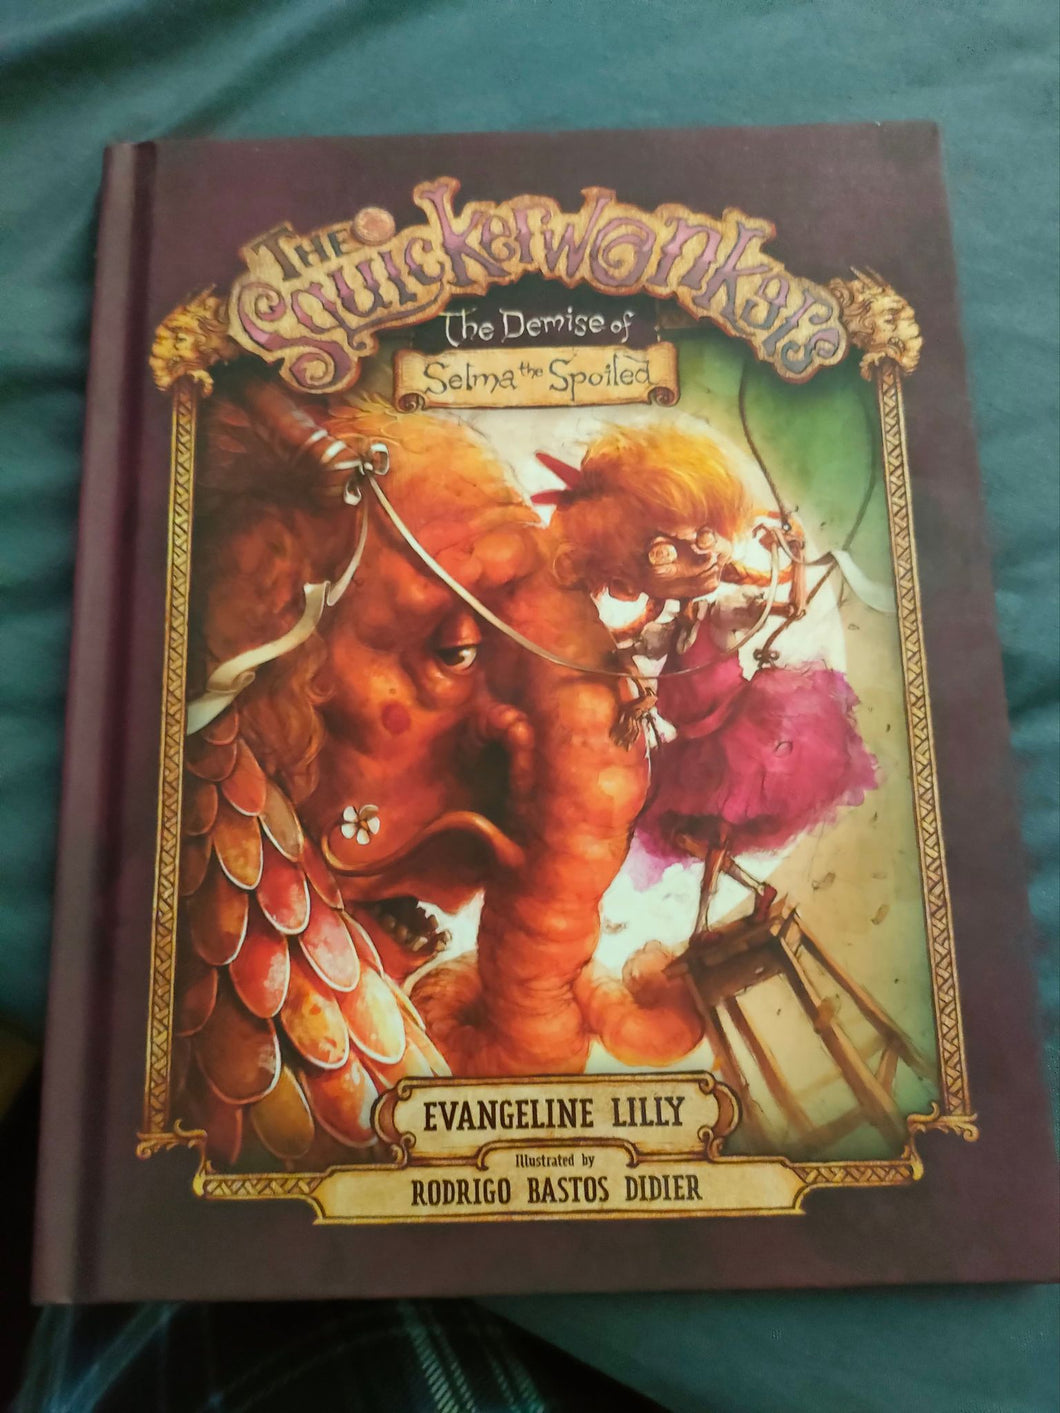 The Squickerwonkers Book 1 signed by Evangeline Lilly and Rodrigo Bastos Didier